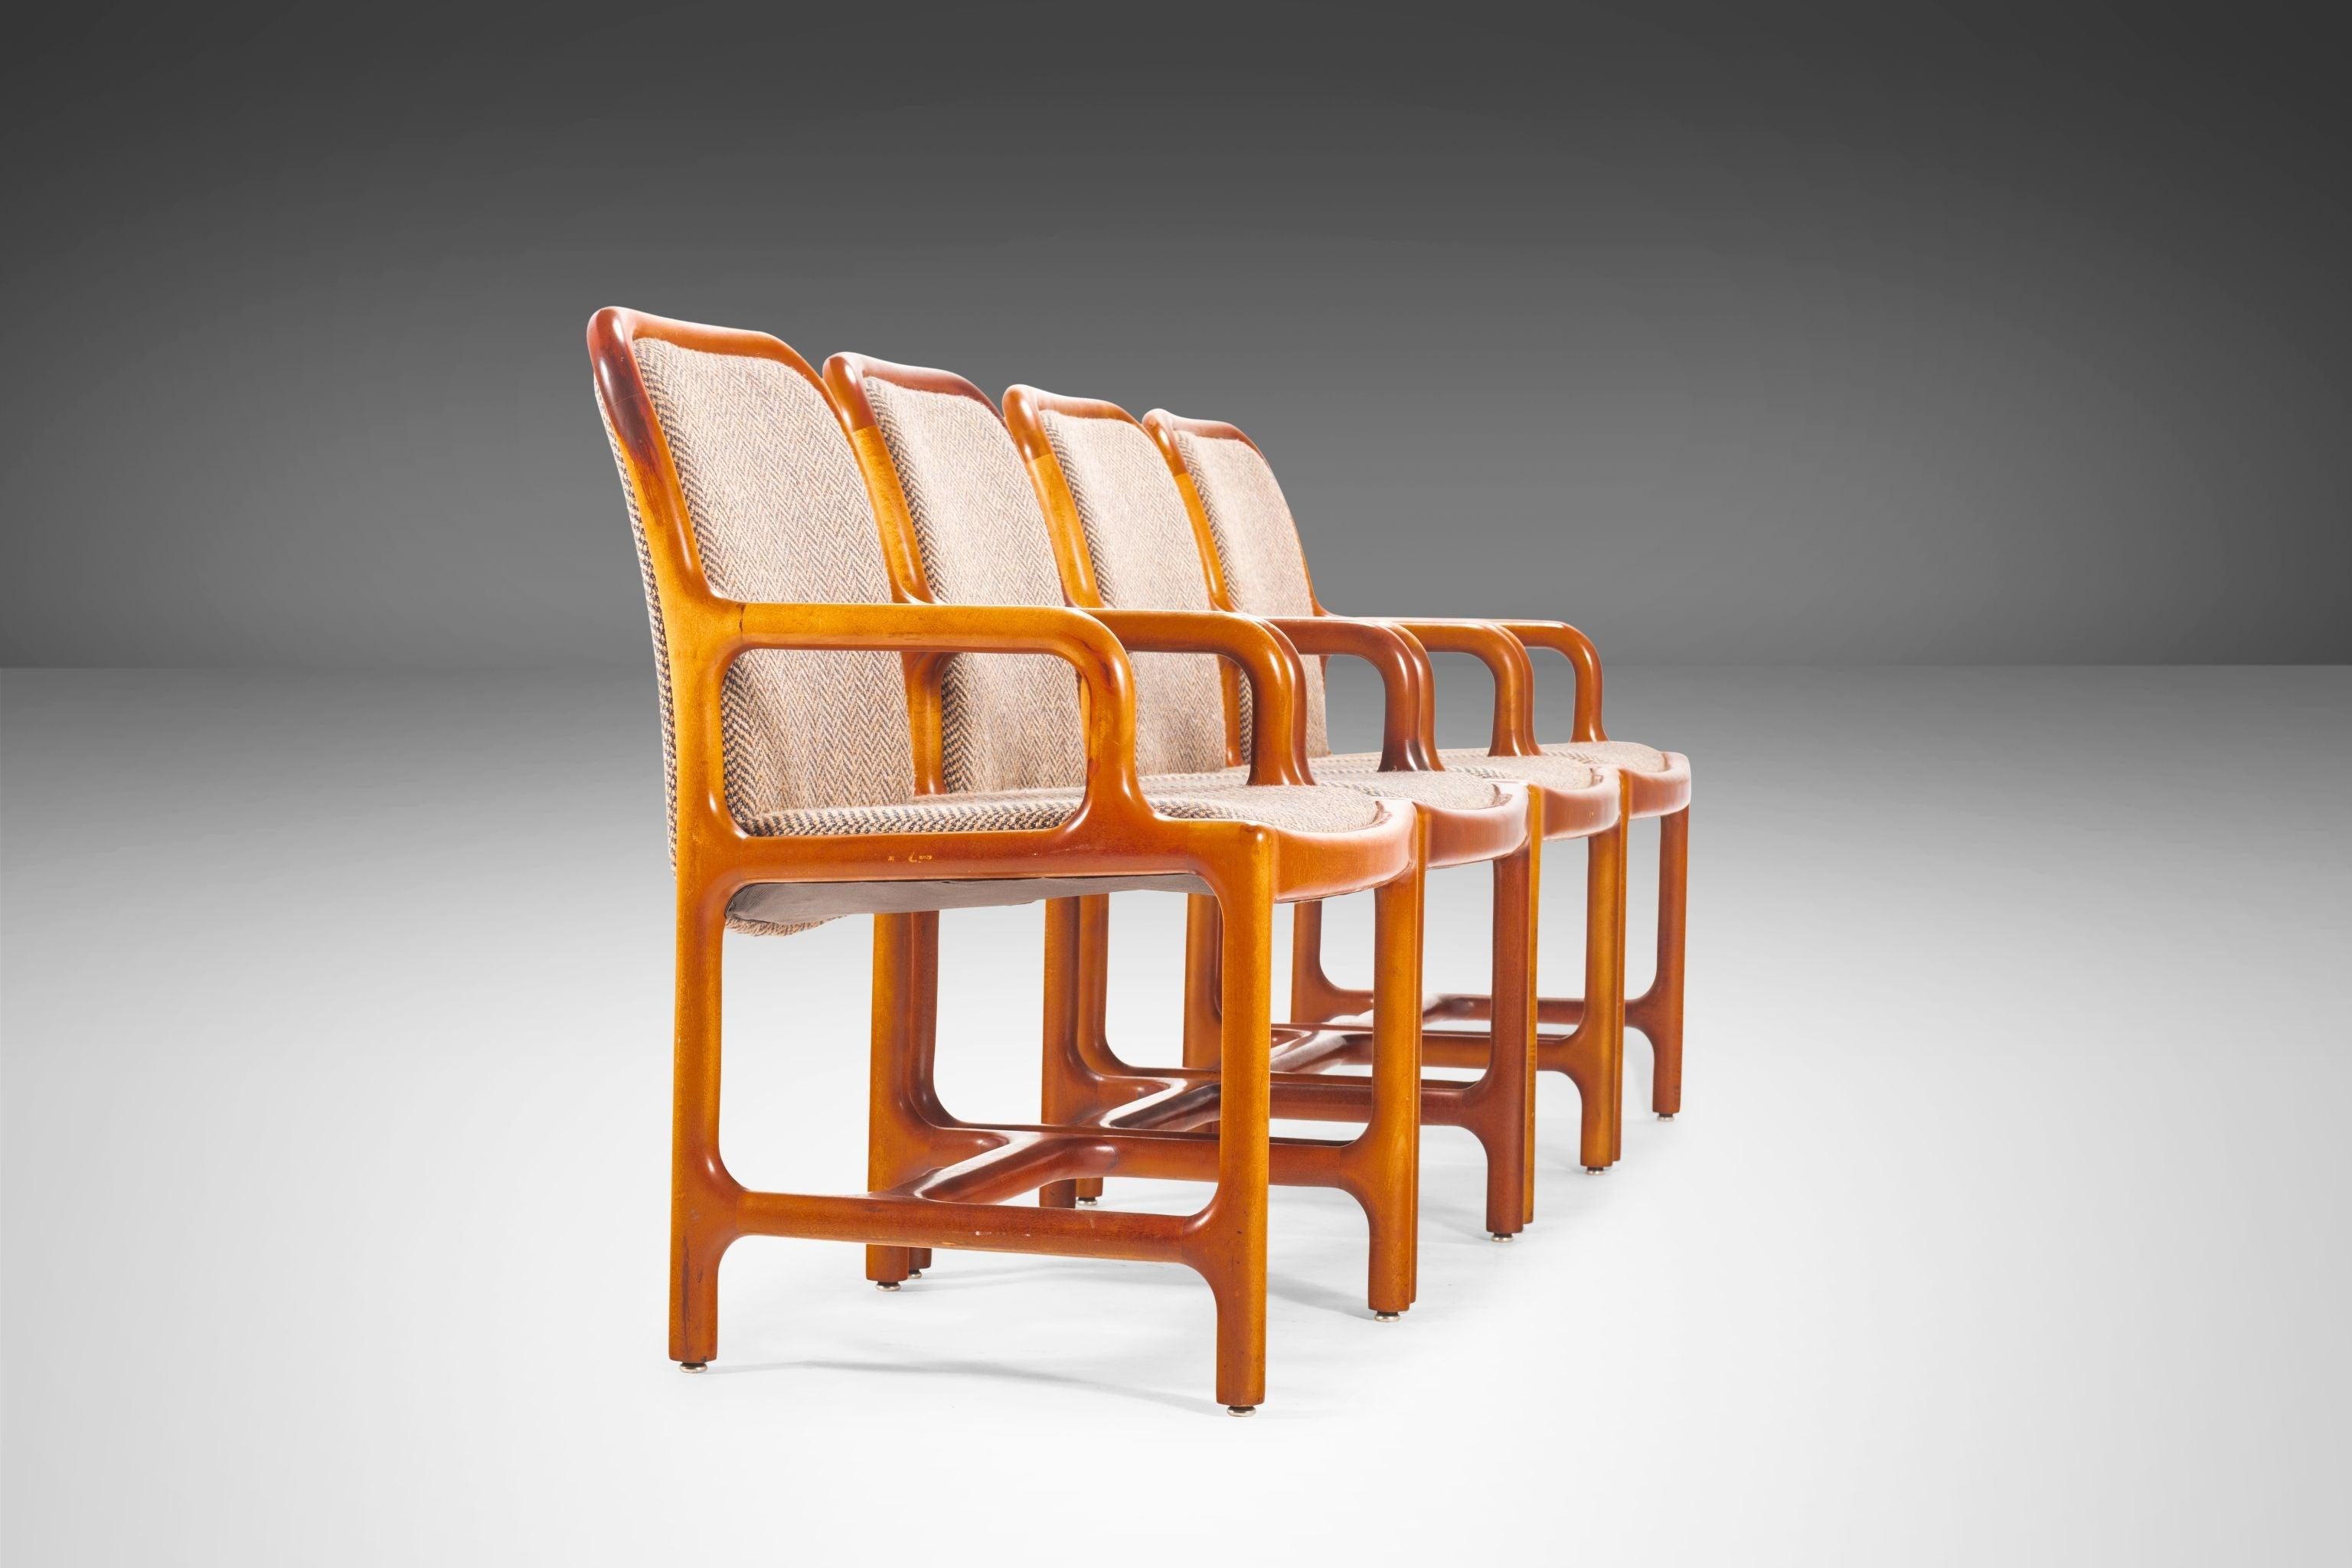 Set of Four (4) Pretzel Chairs in Oak and Original Tweed Fabric, USA, c. 1960's For Sale 11